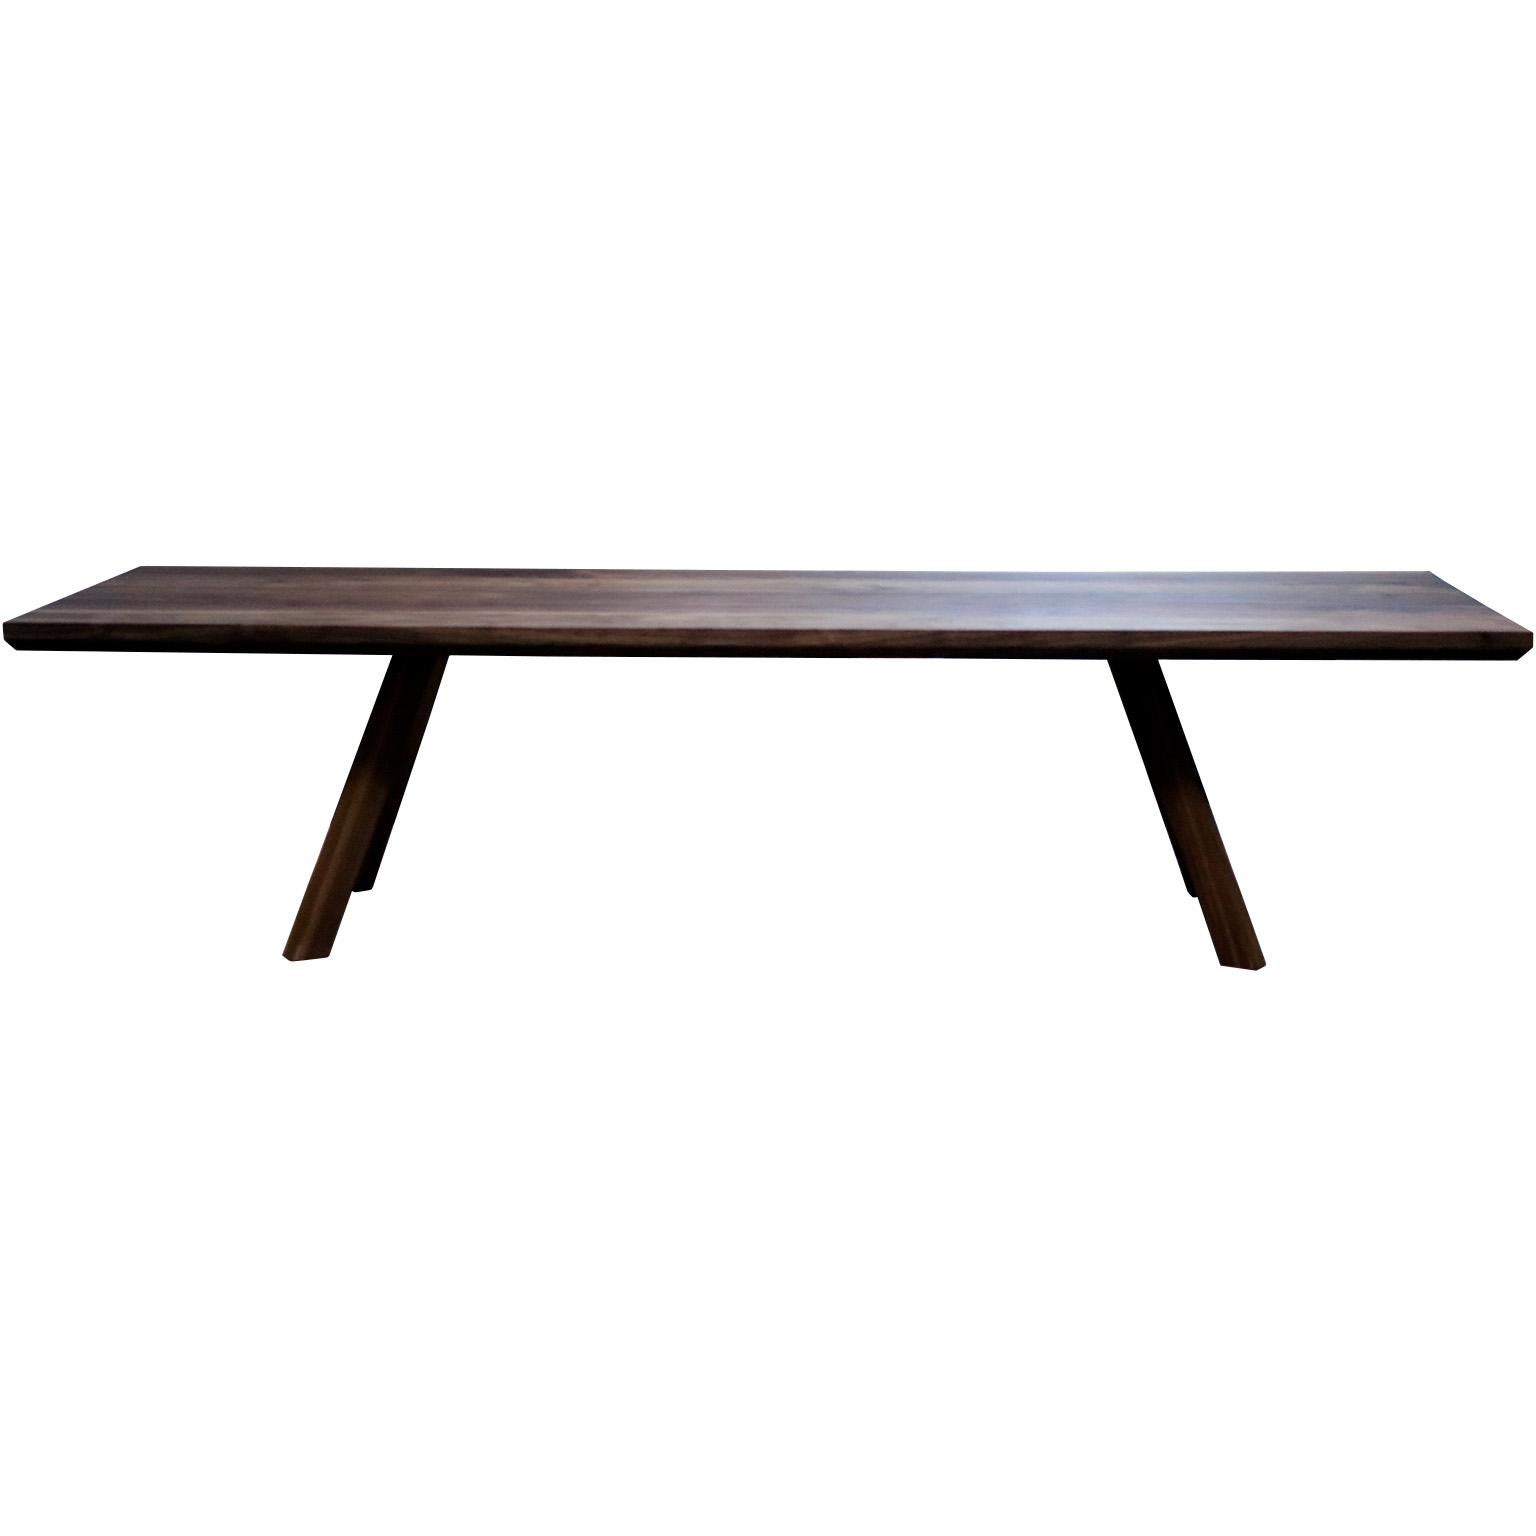 The Apate Coffee Table is crafted from solid walnut wood.  The sight lines are simple, geometric and elegant.  A fine balance of architrcural form and organic wood grain variation.  This table is sure to be a complimentary and unique centrepiece to